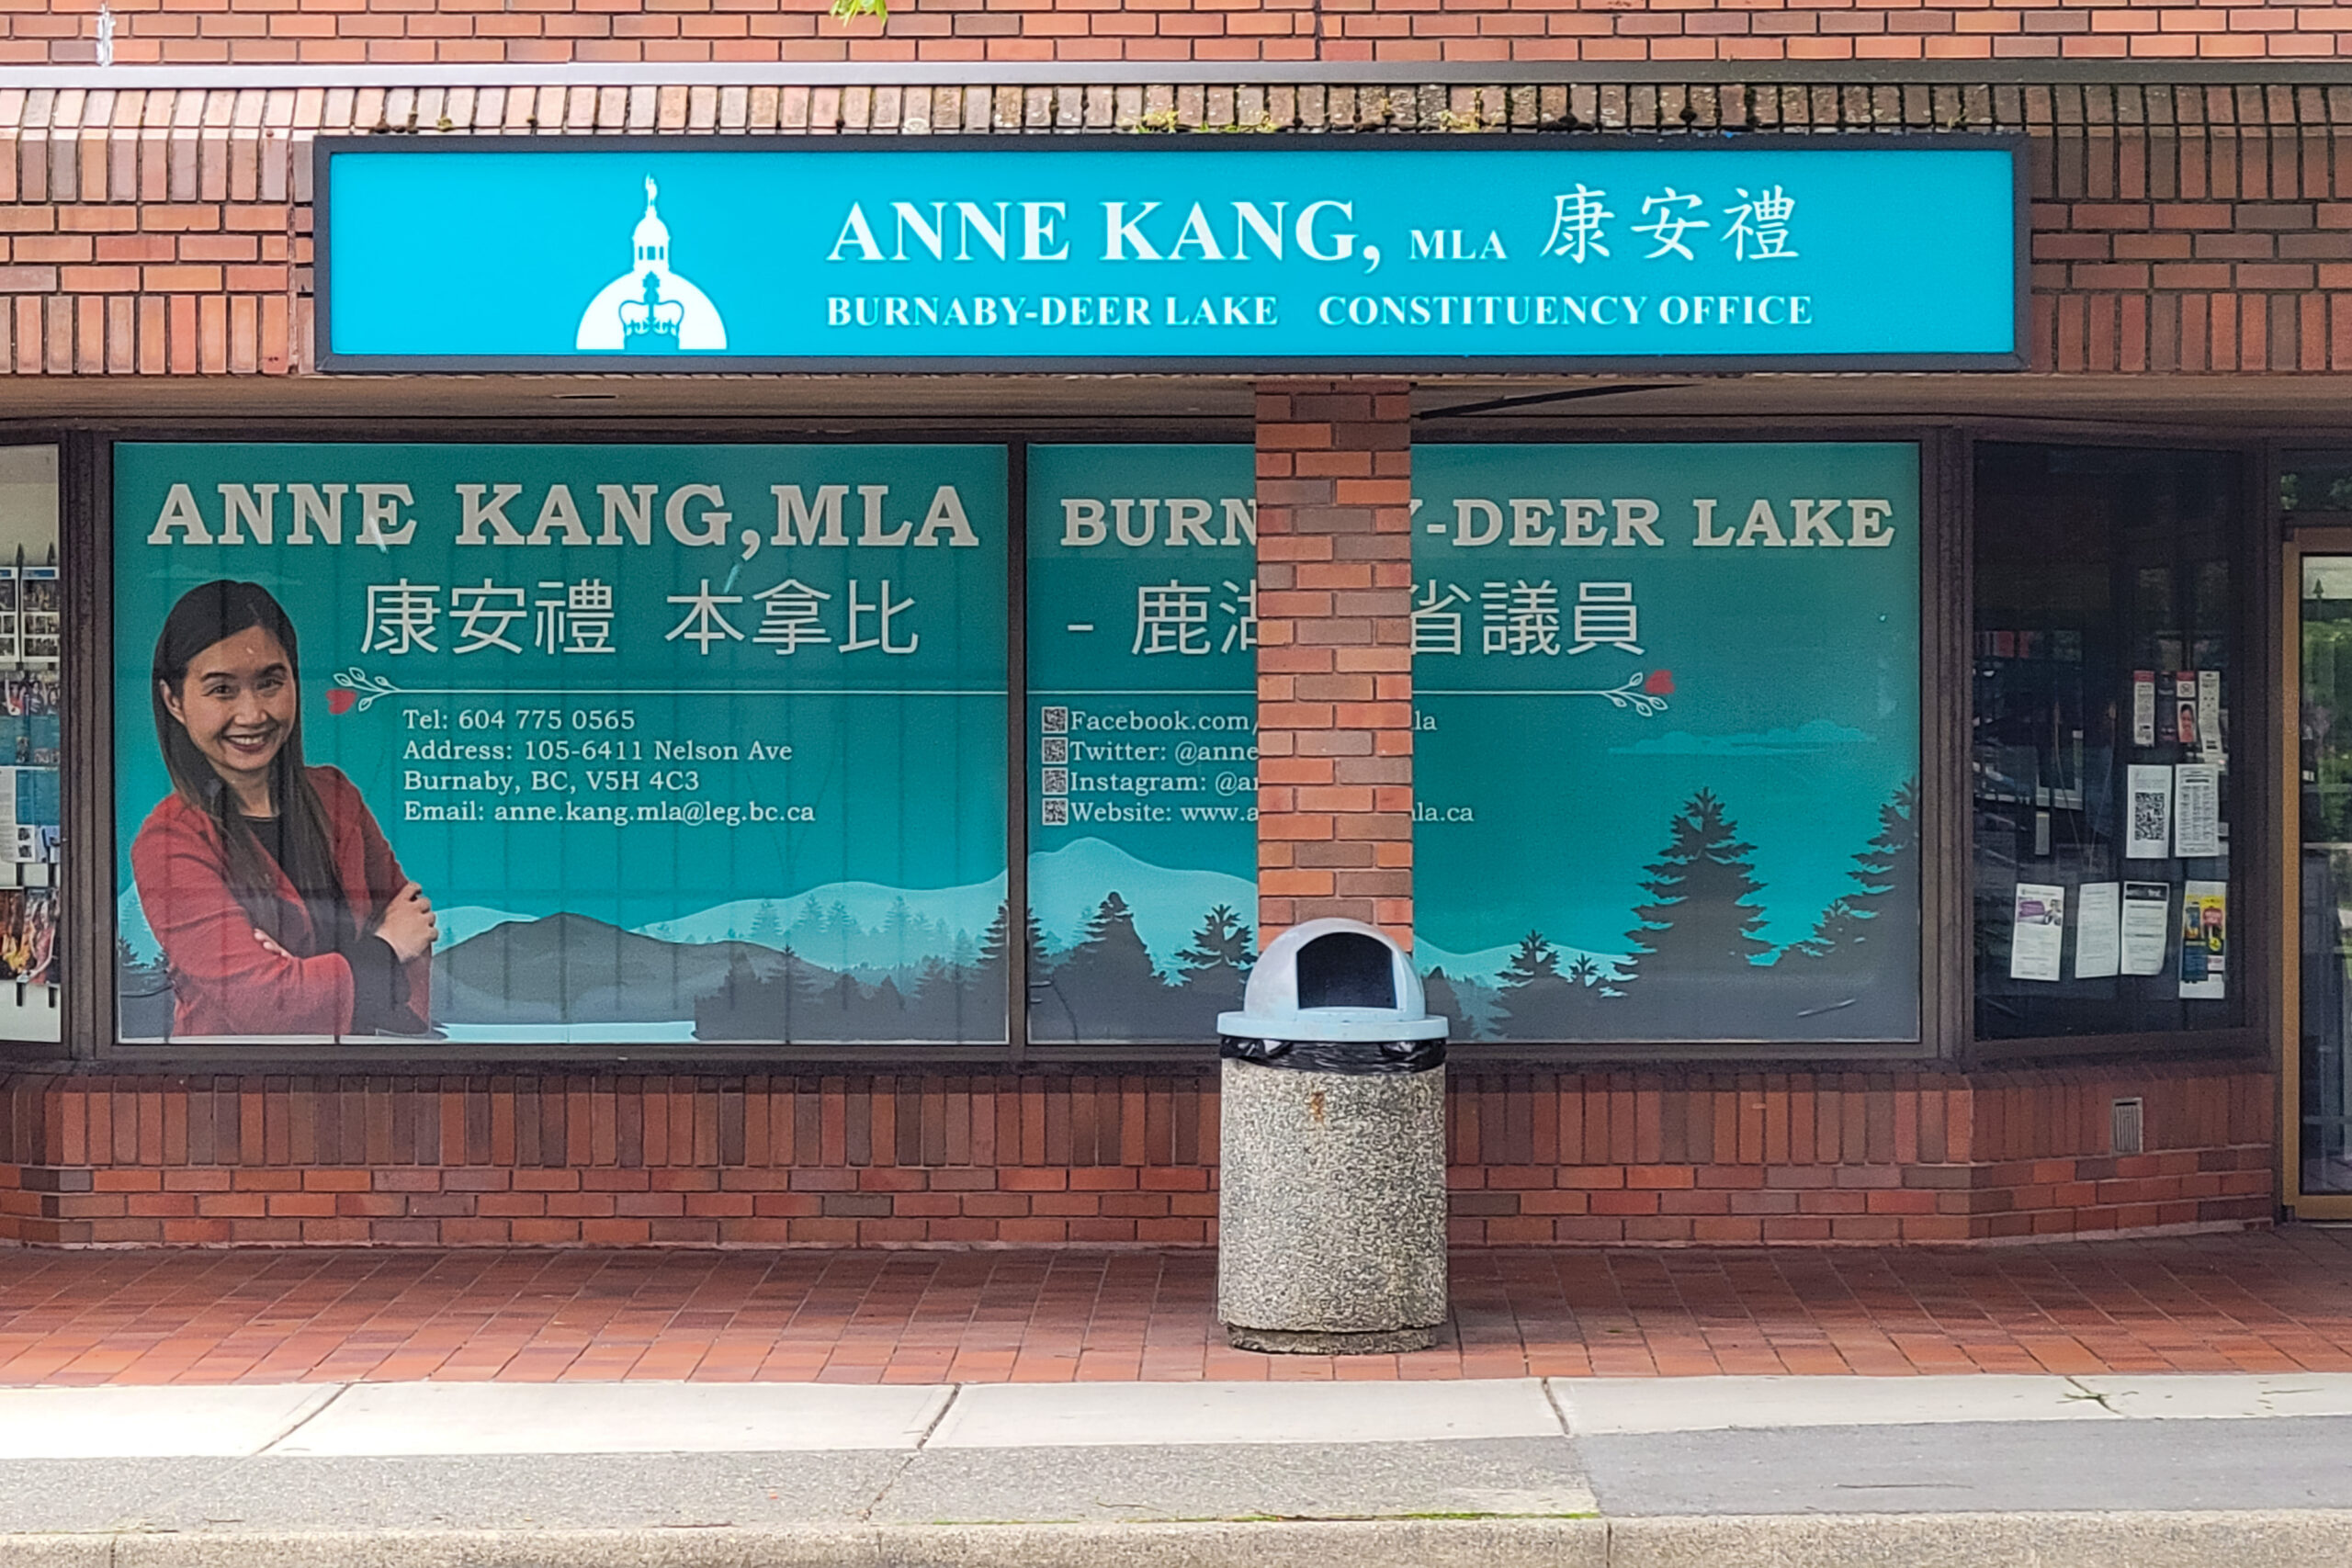 The photo is of the front of NDP MLA Anne Kang's office. The brick building's window has Kang's name and a photo of her face on it.